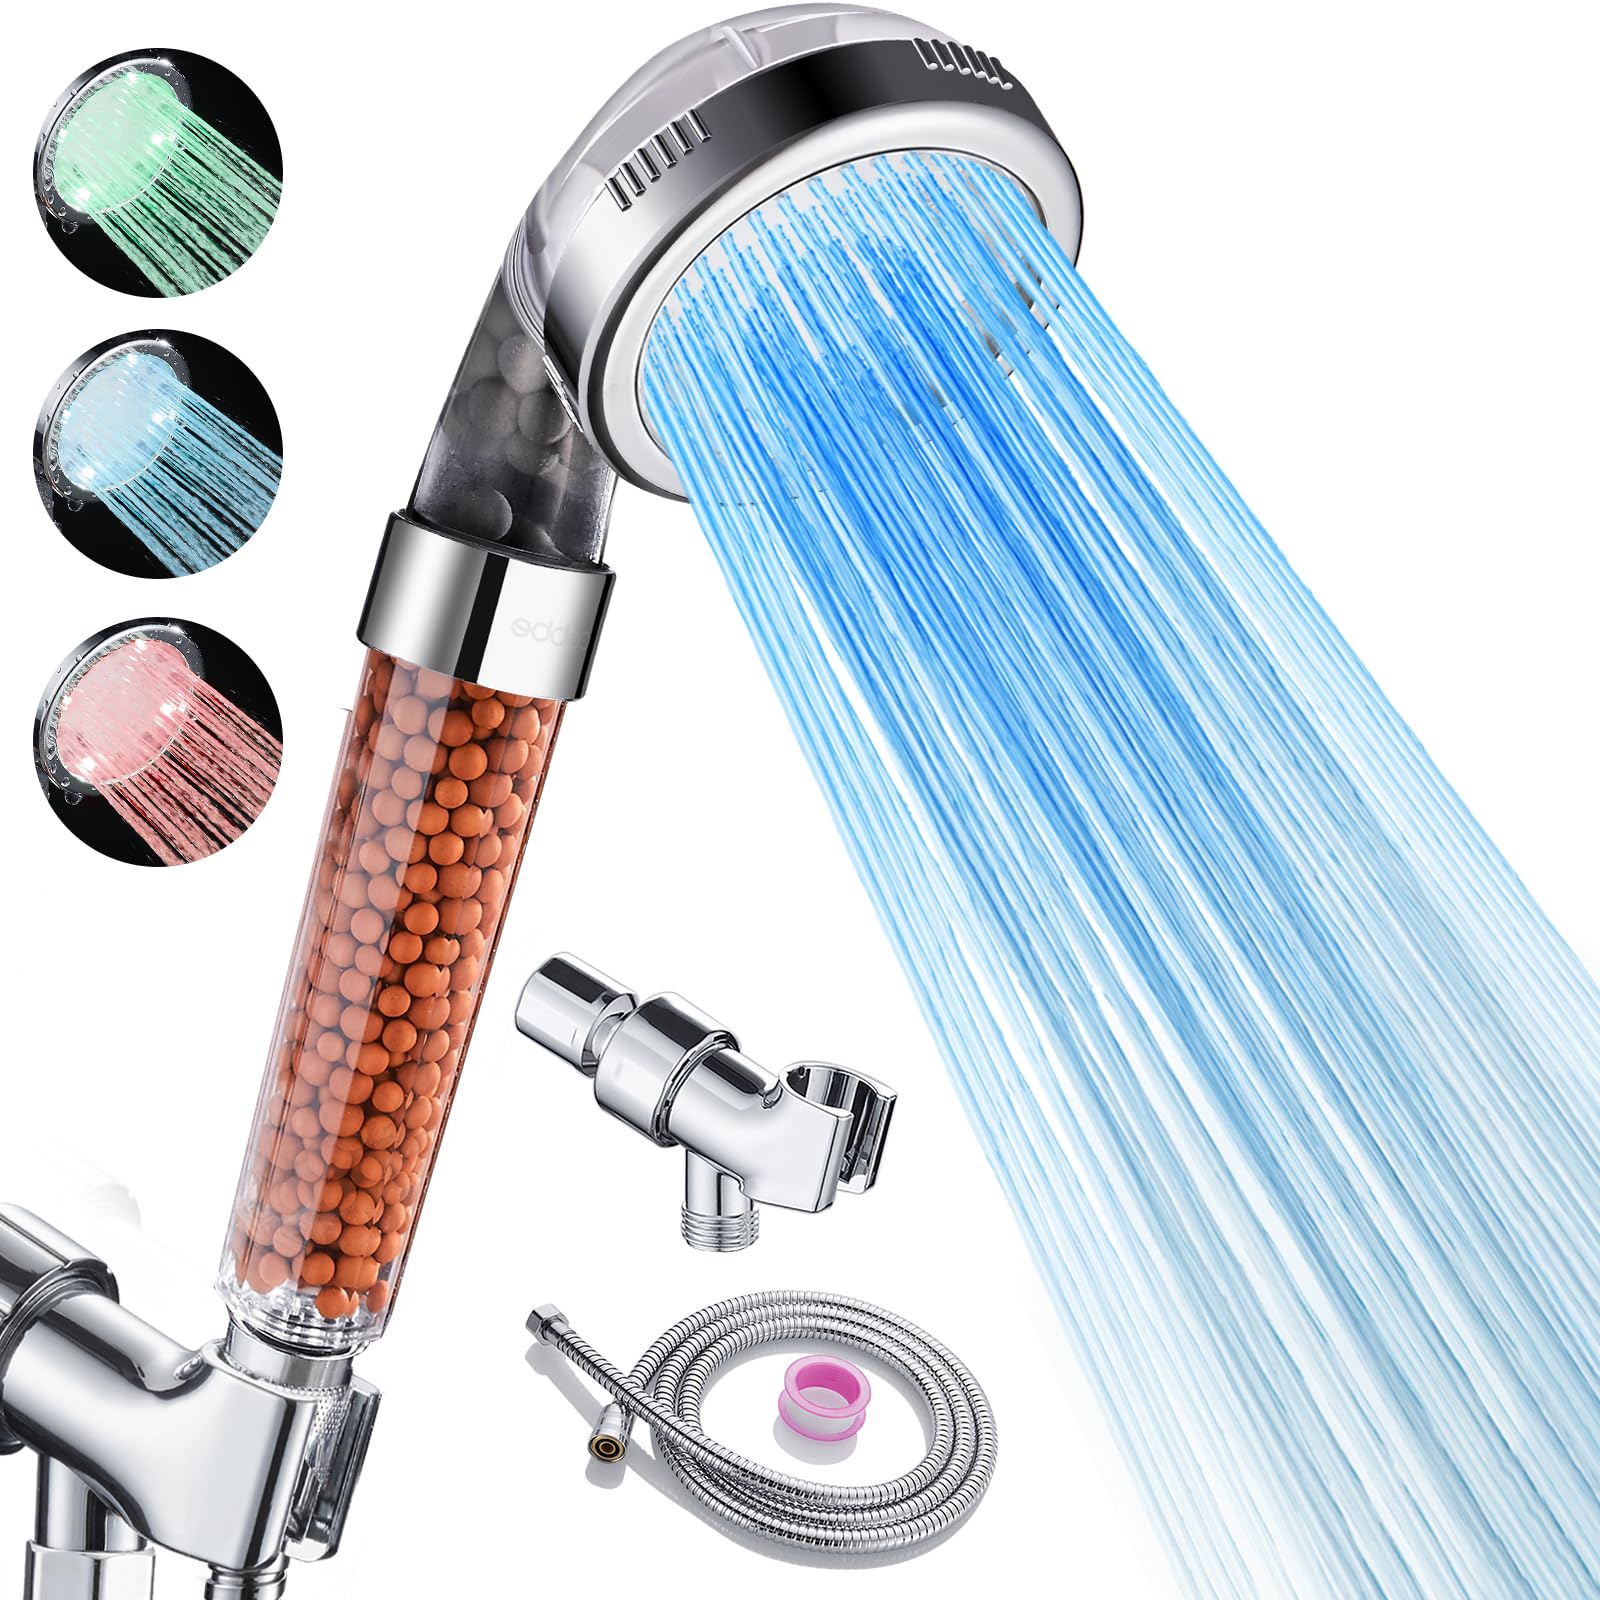 cobbe Filtered LED Shower Head with Handheld, color changing, High Pressure Shower Head with Filter, Water Saving Spray Handheld